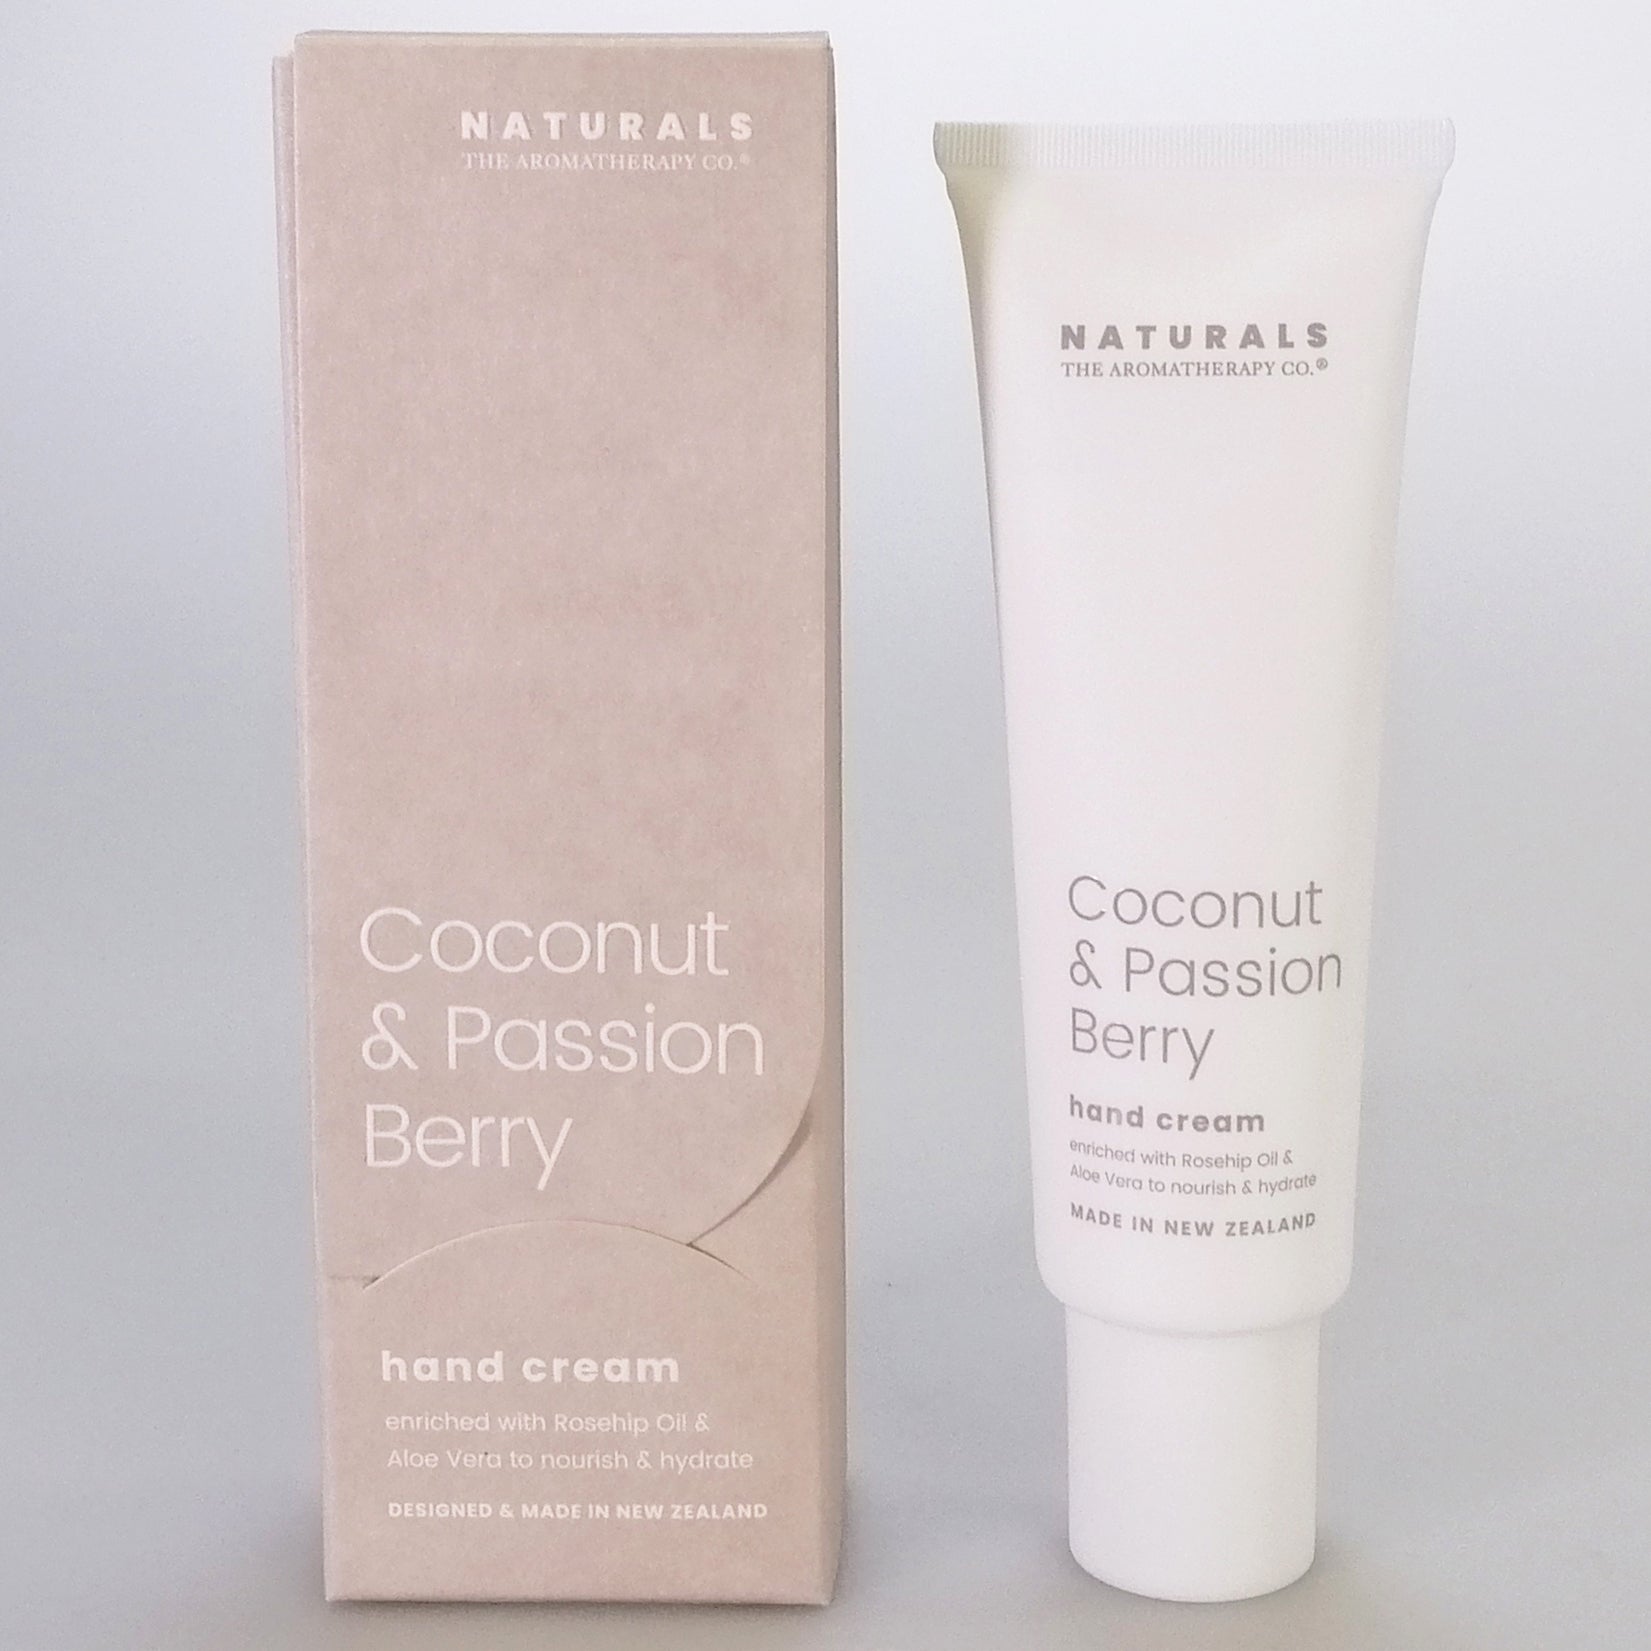 The Aromatherapy Co. Naturals - Coconut & Passion Berry Hand Cream